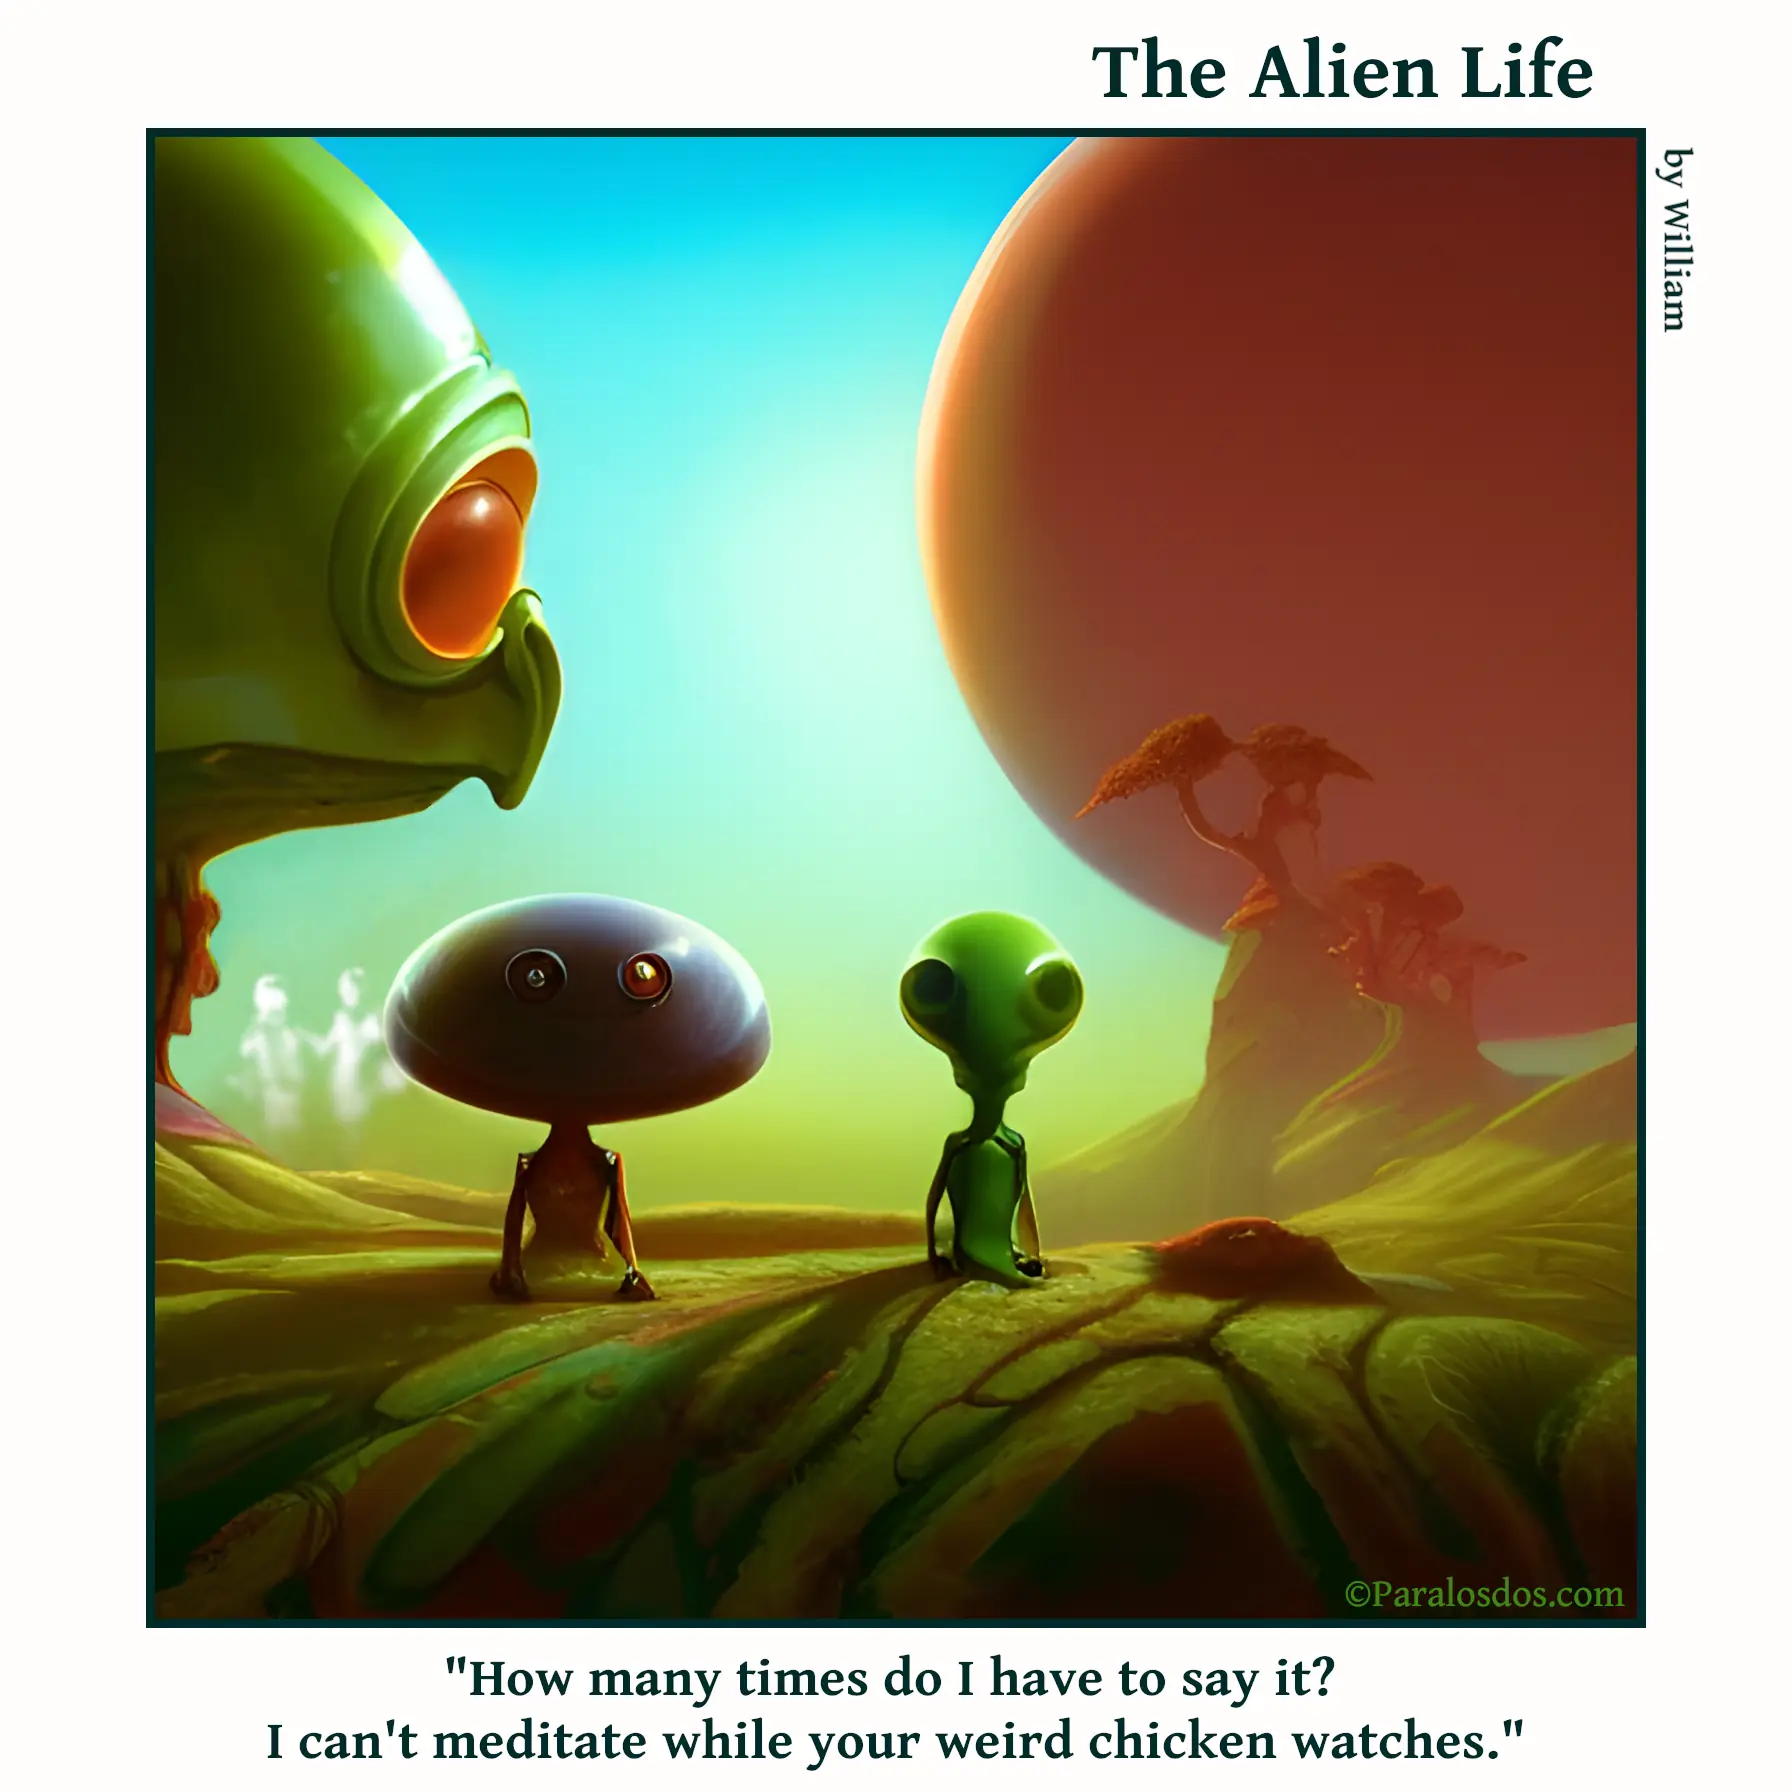 The Alien Life, one panel Comic. Two aliens are sitting cross-legged beside each other. Hovering over them to the left of the image is a giant alien chicken head. The caption reads: "How many times do I have to say it? I can't meditate while your weird chicken watches."